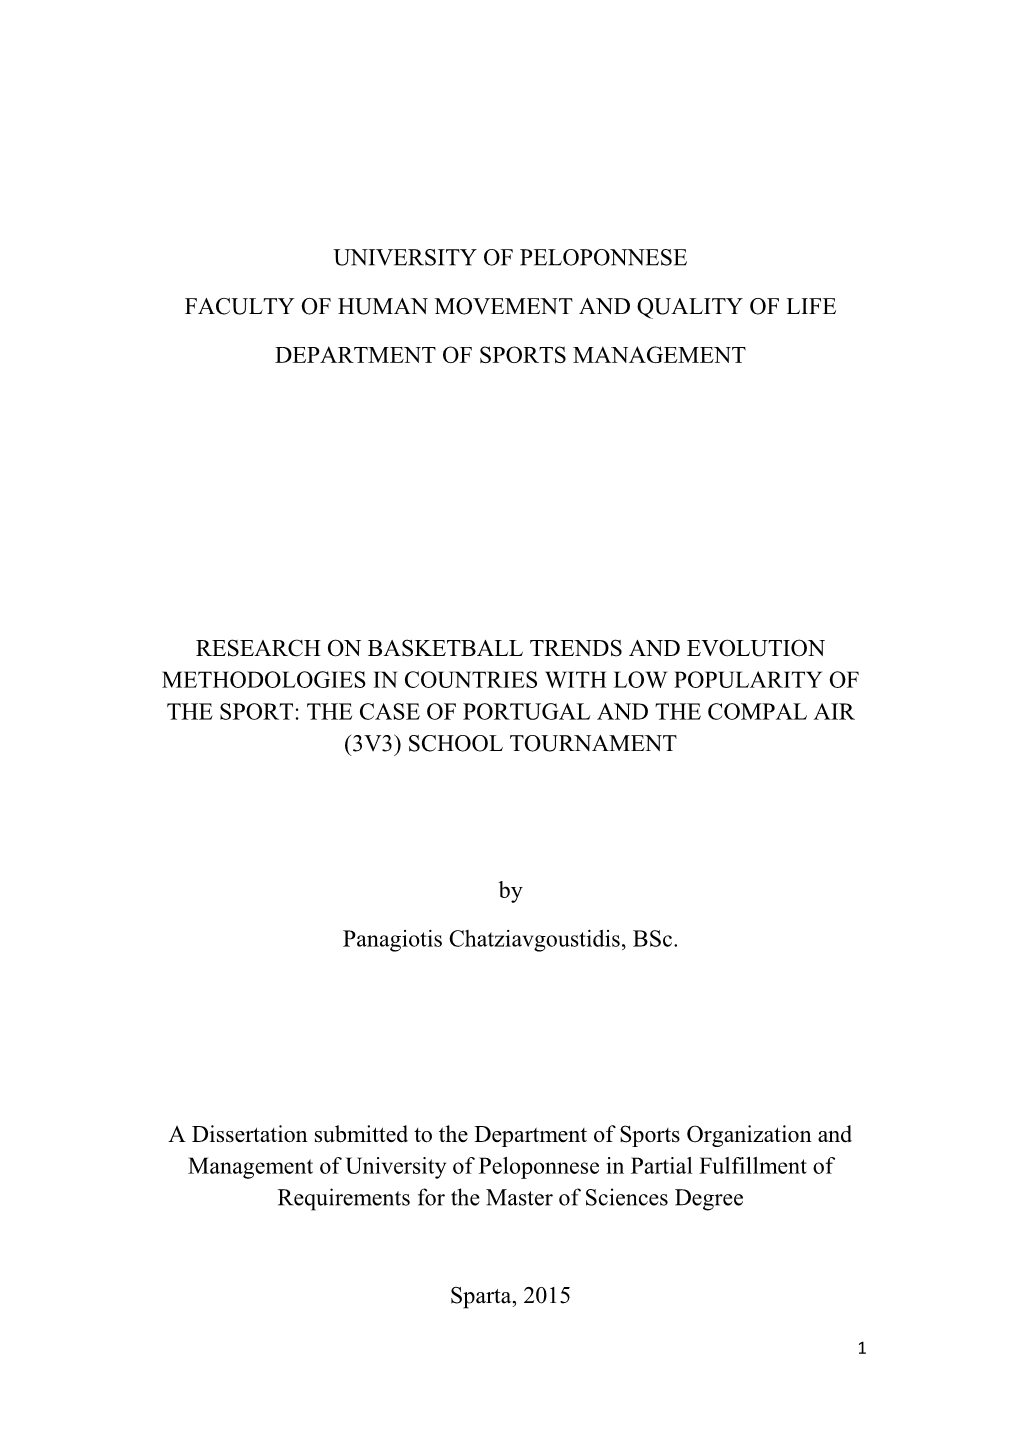 University of Peloponnese Faculty of Human Movement